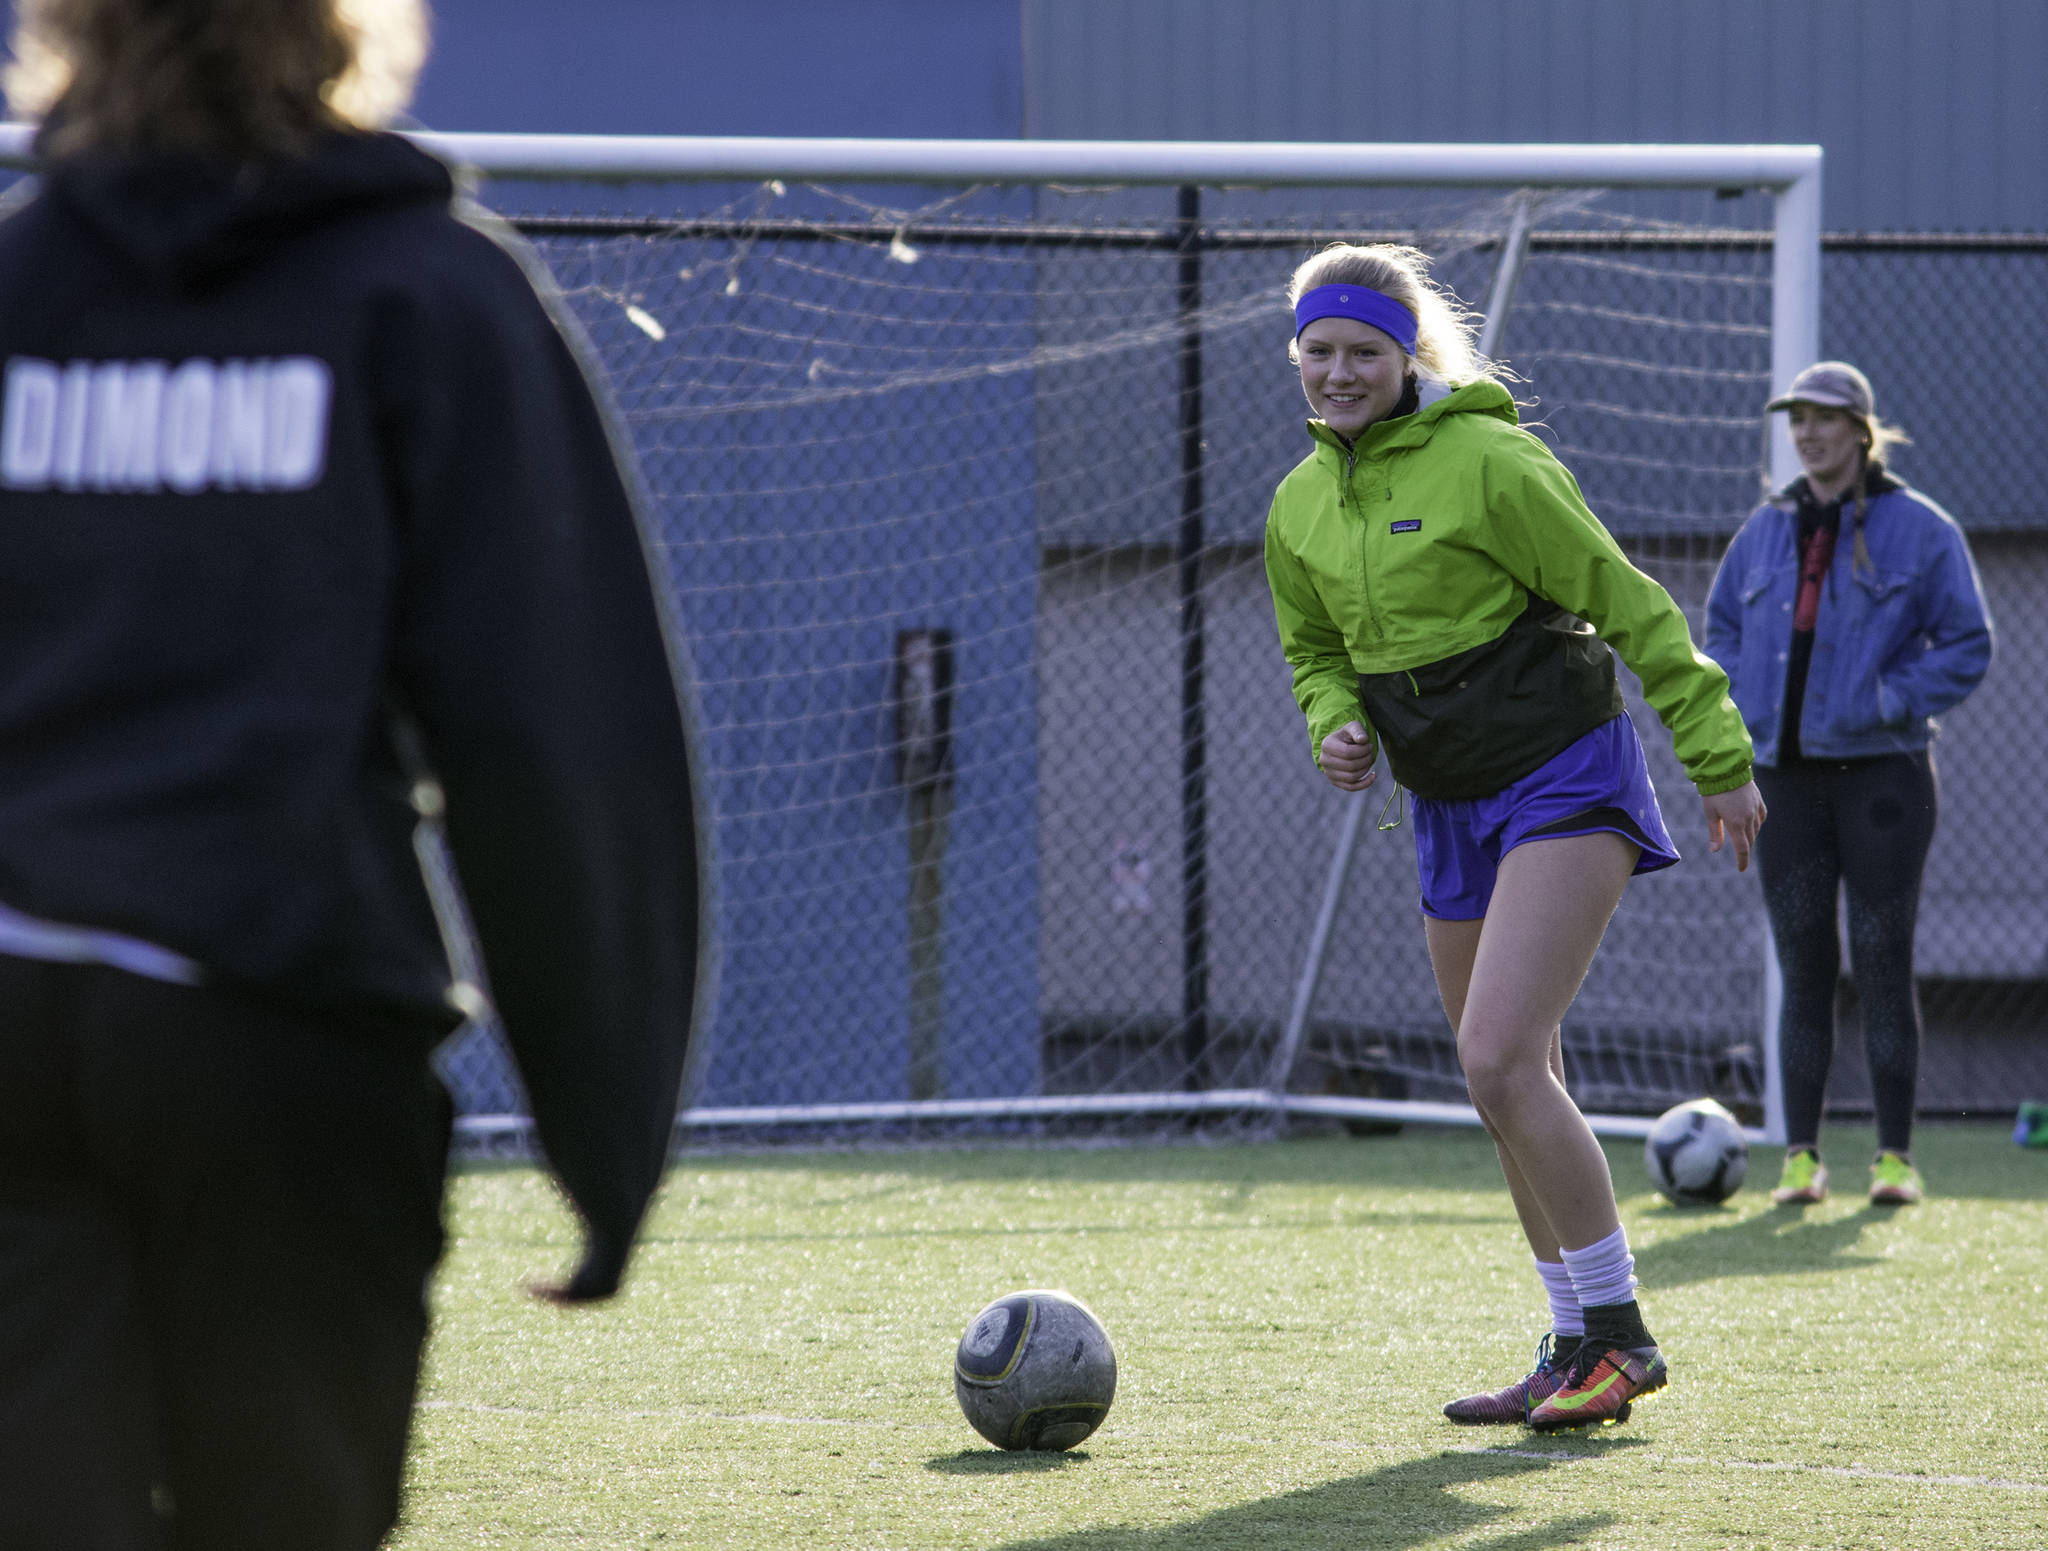 Michaela Bently, center midfielder on the JDHS girls soccer team, warms up at practice on Tuesday, April 3, 2018. (Richard McGrail | Juneau Empire)